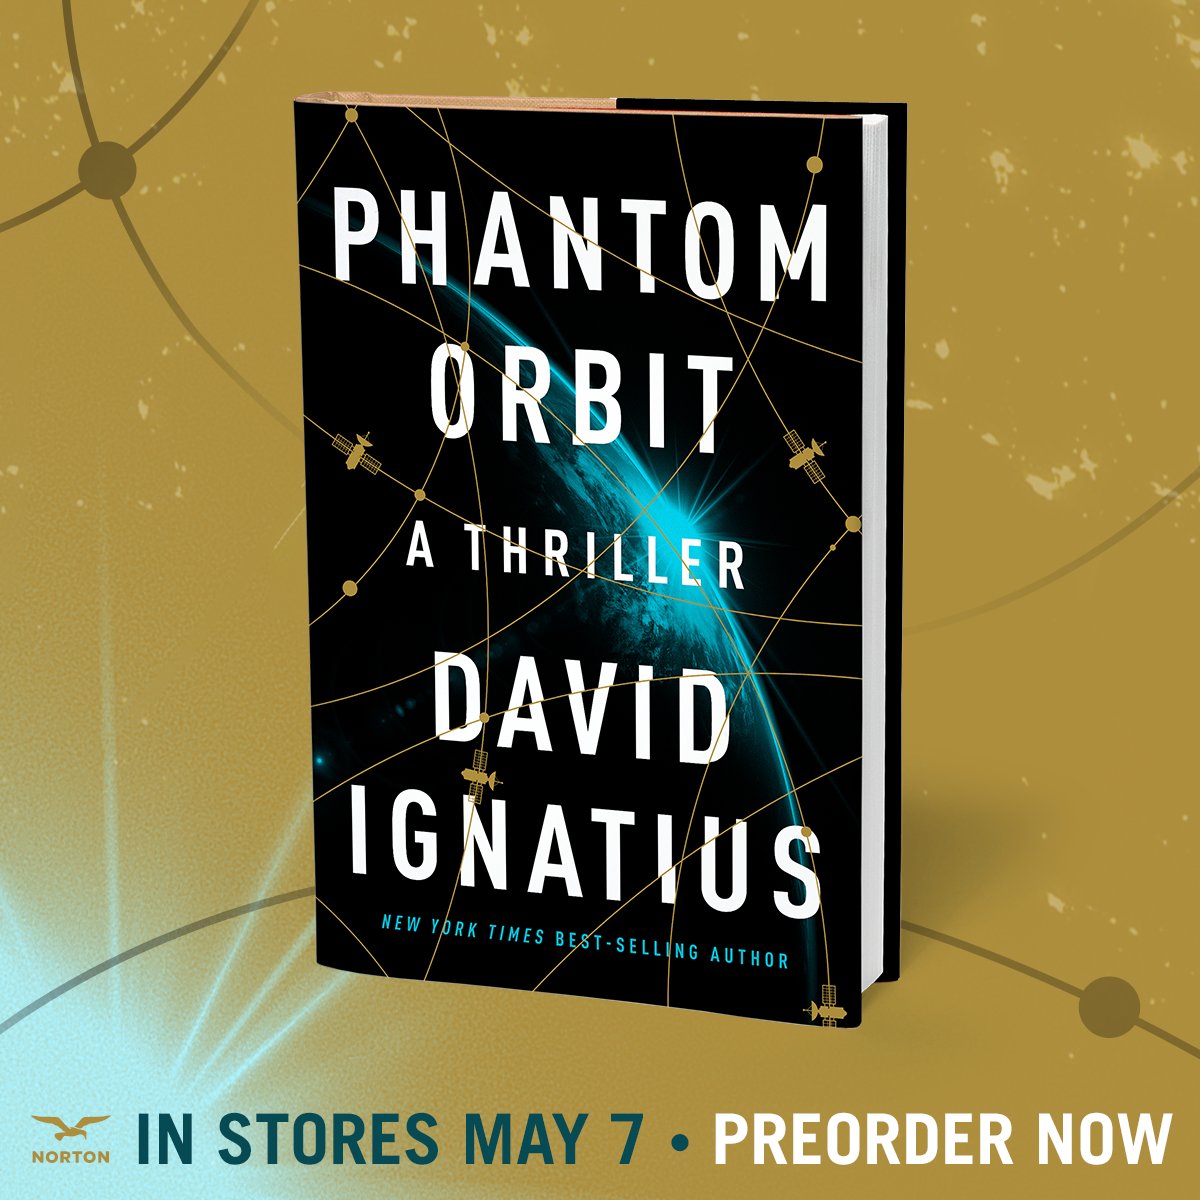 Readers curious about space warfare may want to read (and advance order!) my new novel, “Phantom Orbit” Though fiction, the plot has eerie similarities with the Russian space weapons chatter triggered by Rep. Mike Turner. wwnorton.com/books/phantom-… [wwnorton.com]